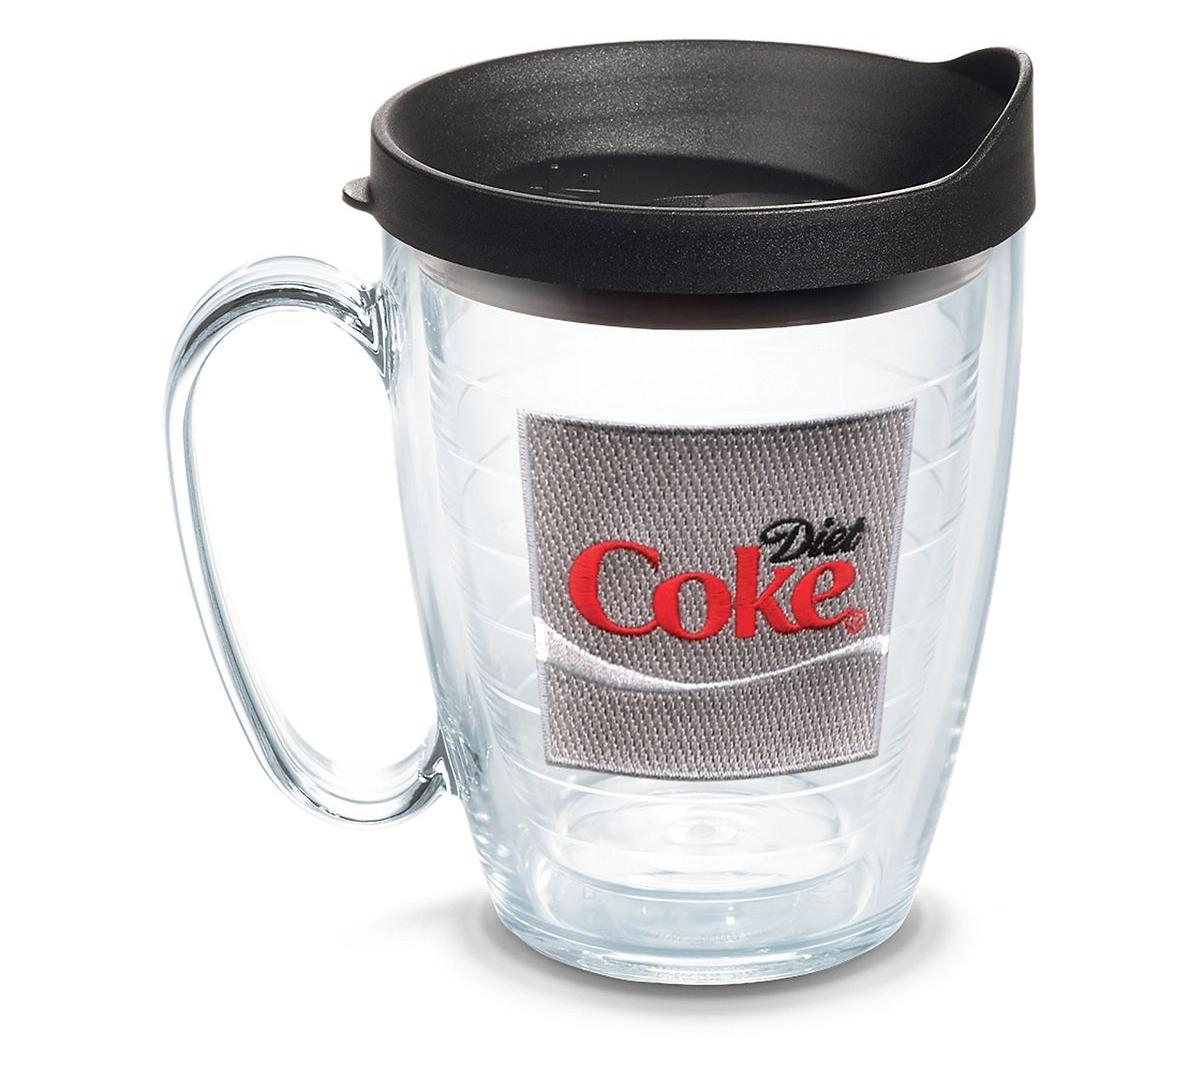 Tervis Tumbler Tervis Coca-cola Made In Usa Double Walled Insulated Tumbler Travel Cup Keeps Drinks Cold & Hot, 16o In Open Miscellaneous